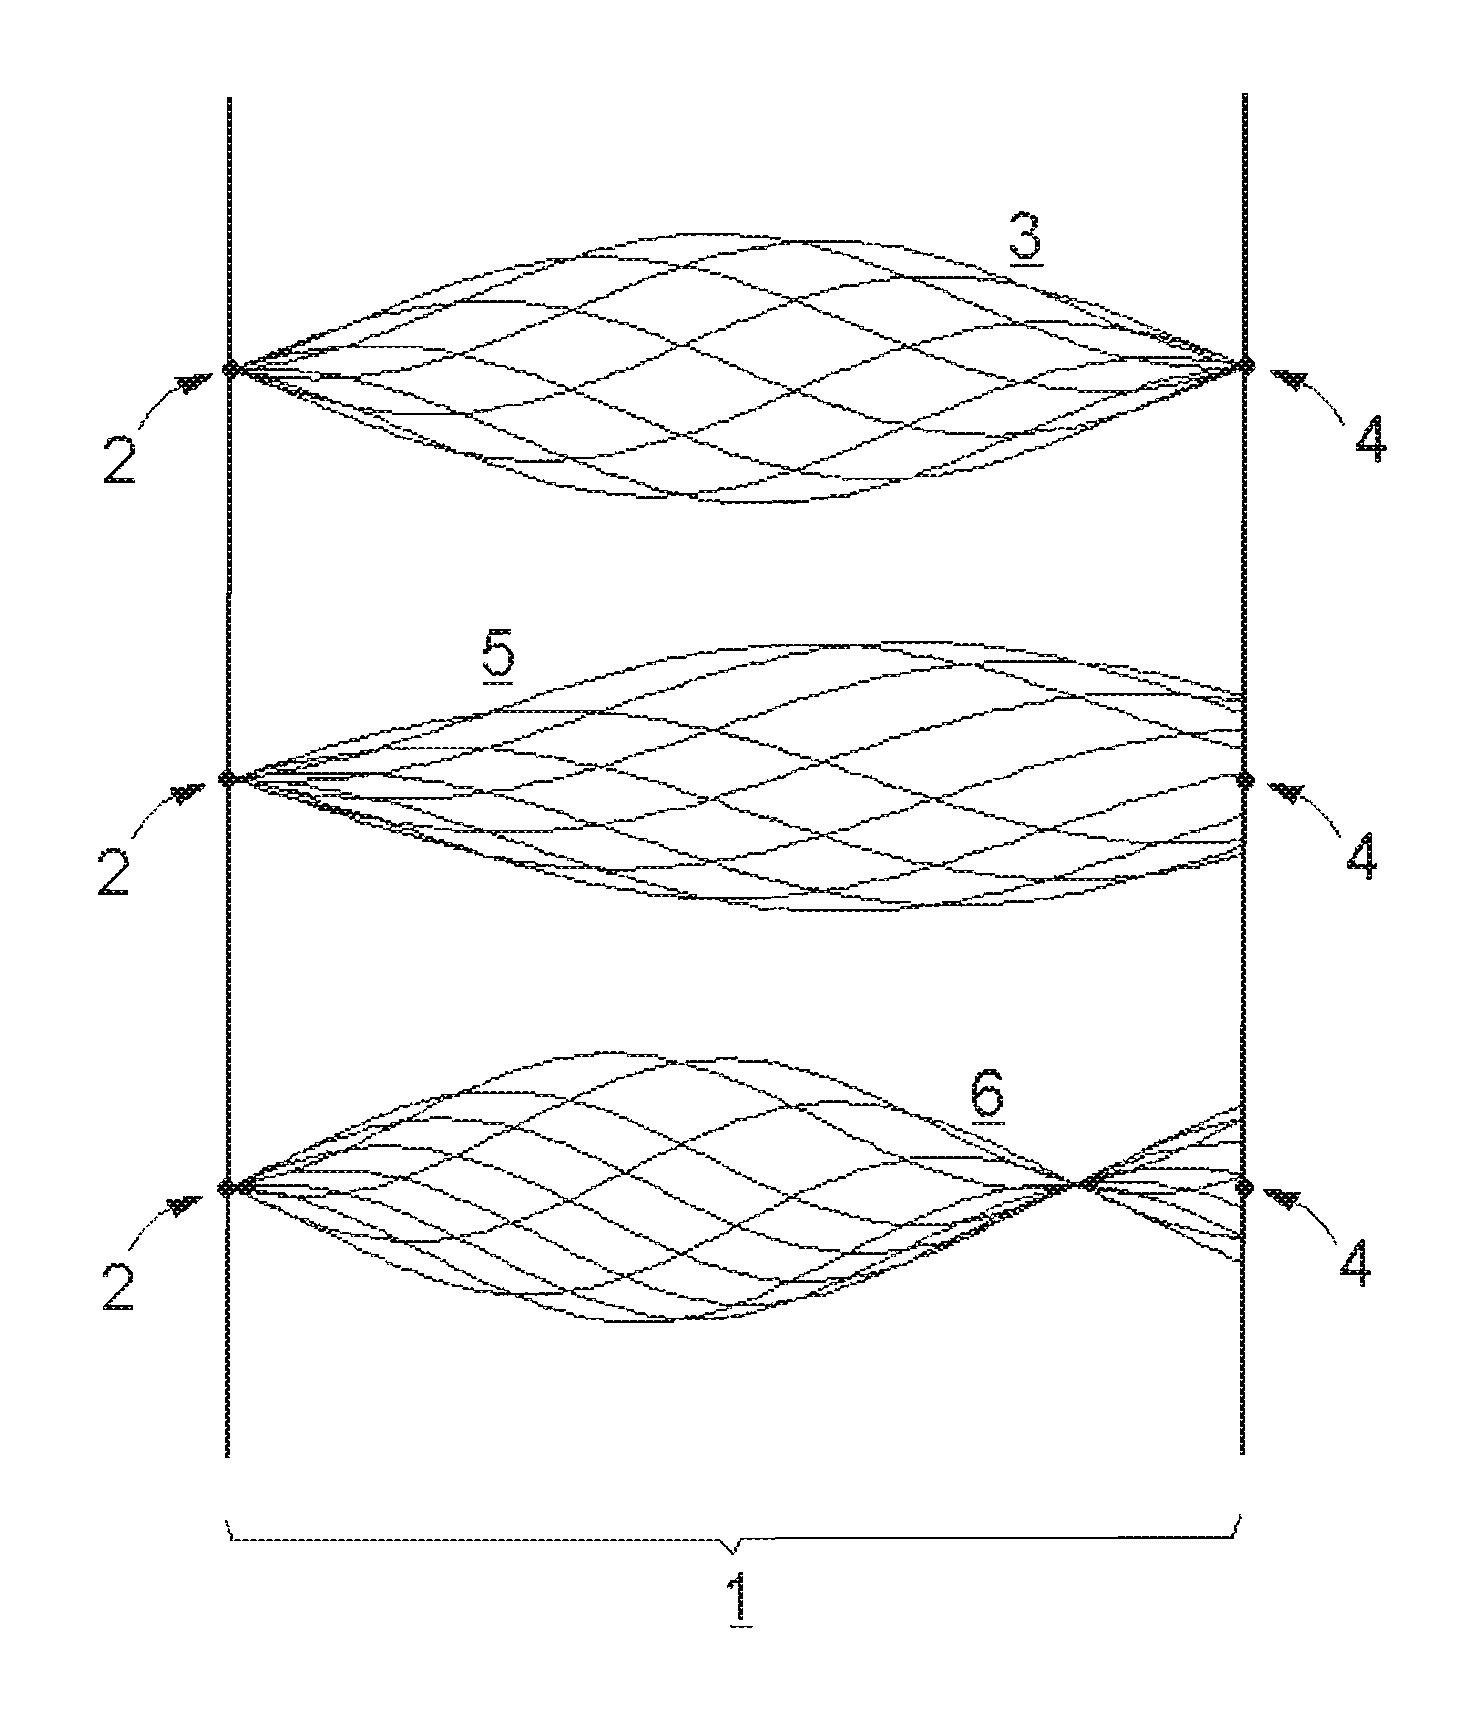 Method and apparatus to produce steady beams of mobility selected ions via time-dependent electric fields